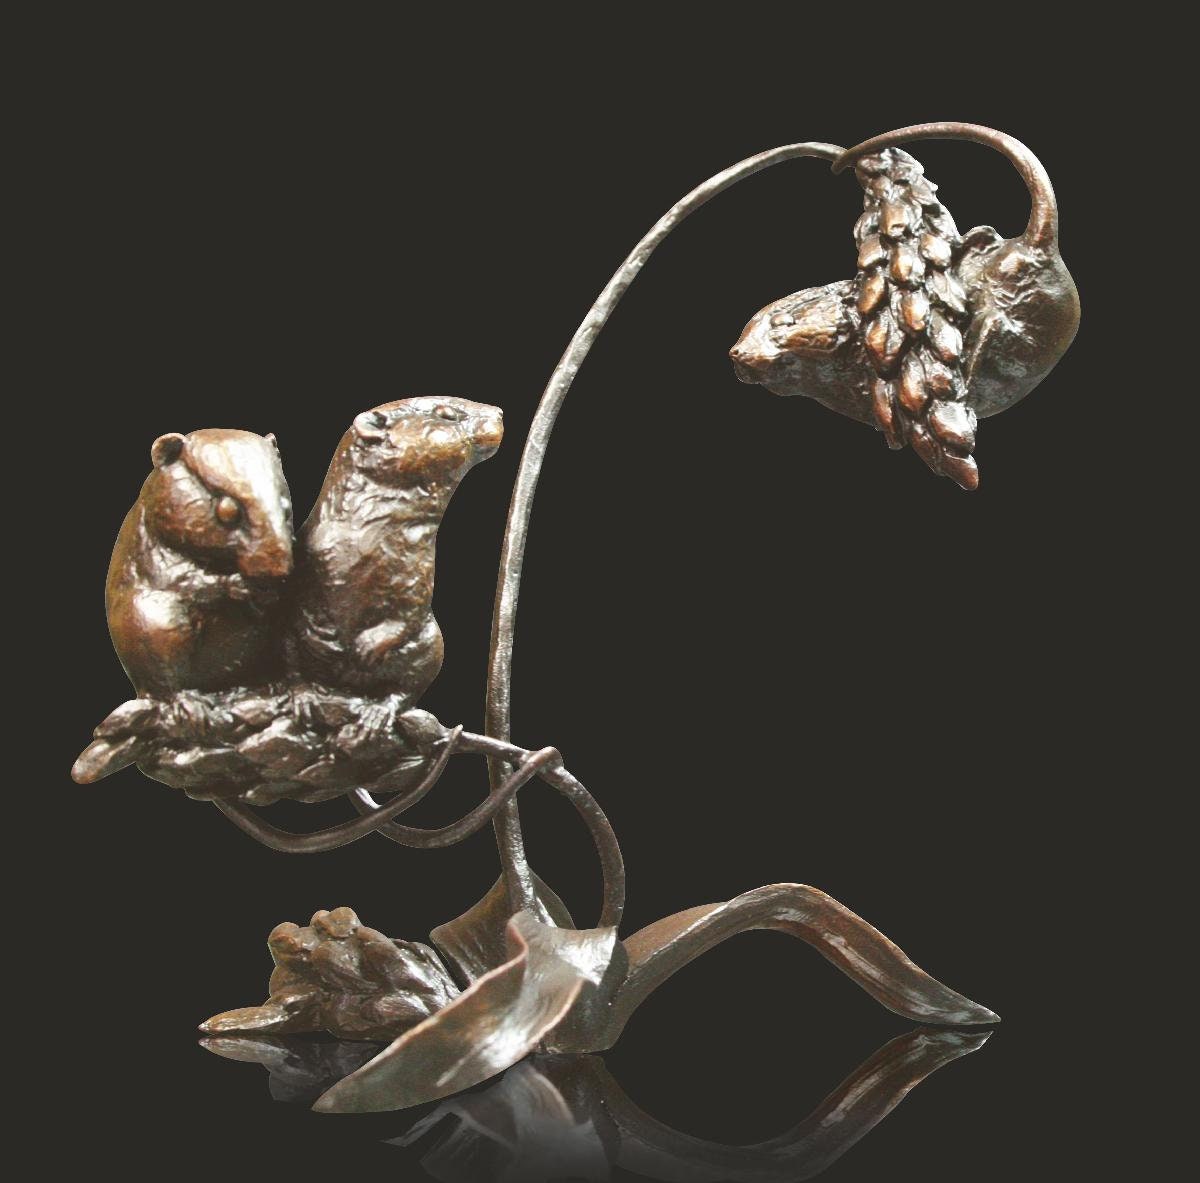 Twos Company - Michael Simpson (Limited Edition Foundry Bronze Sculpture) mouse figurine home decor wedding gift